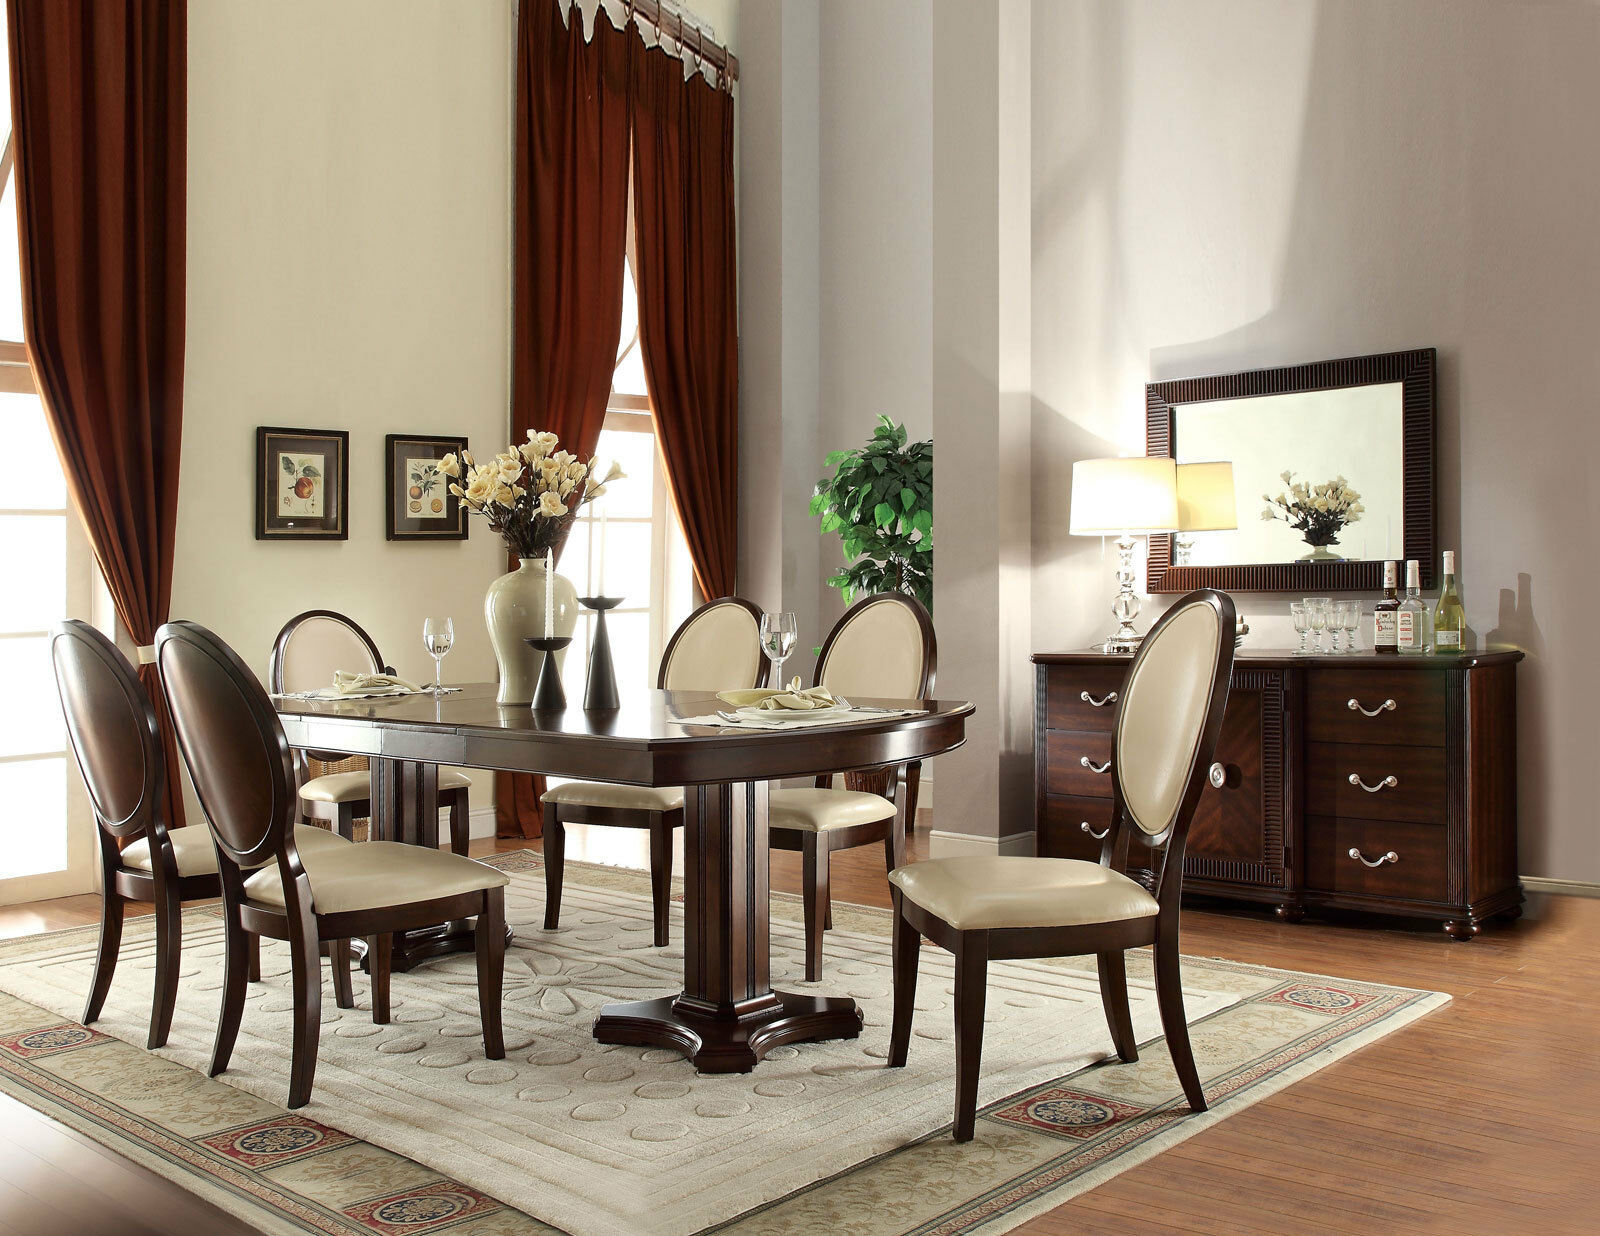 OAKVILLE Art Deco Brown Dining Room Furniture Set - 7 pieces Oval Table